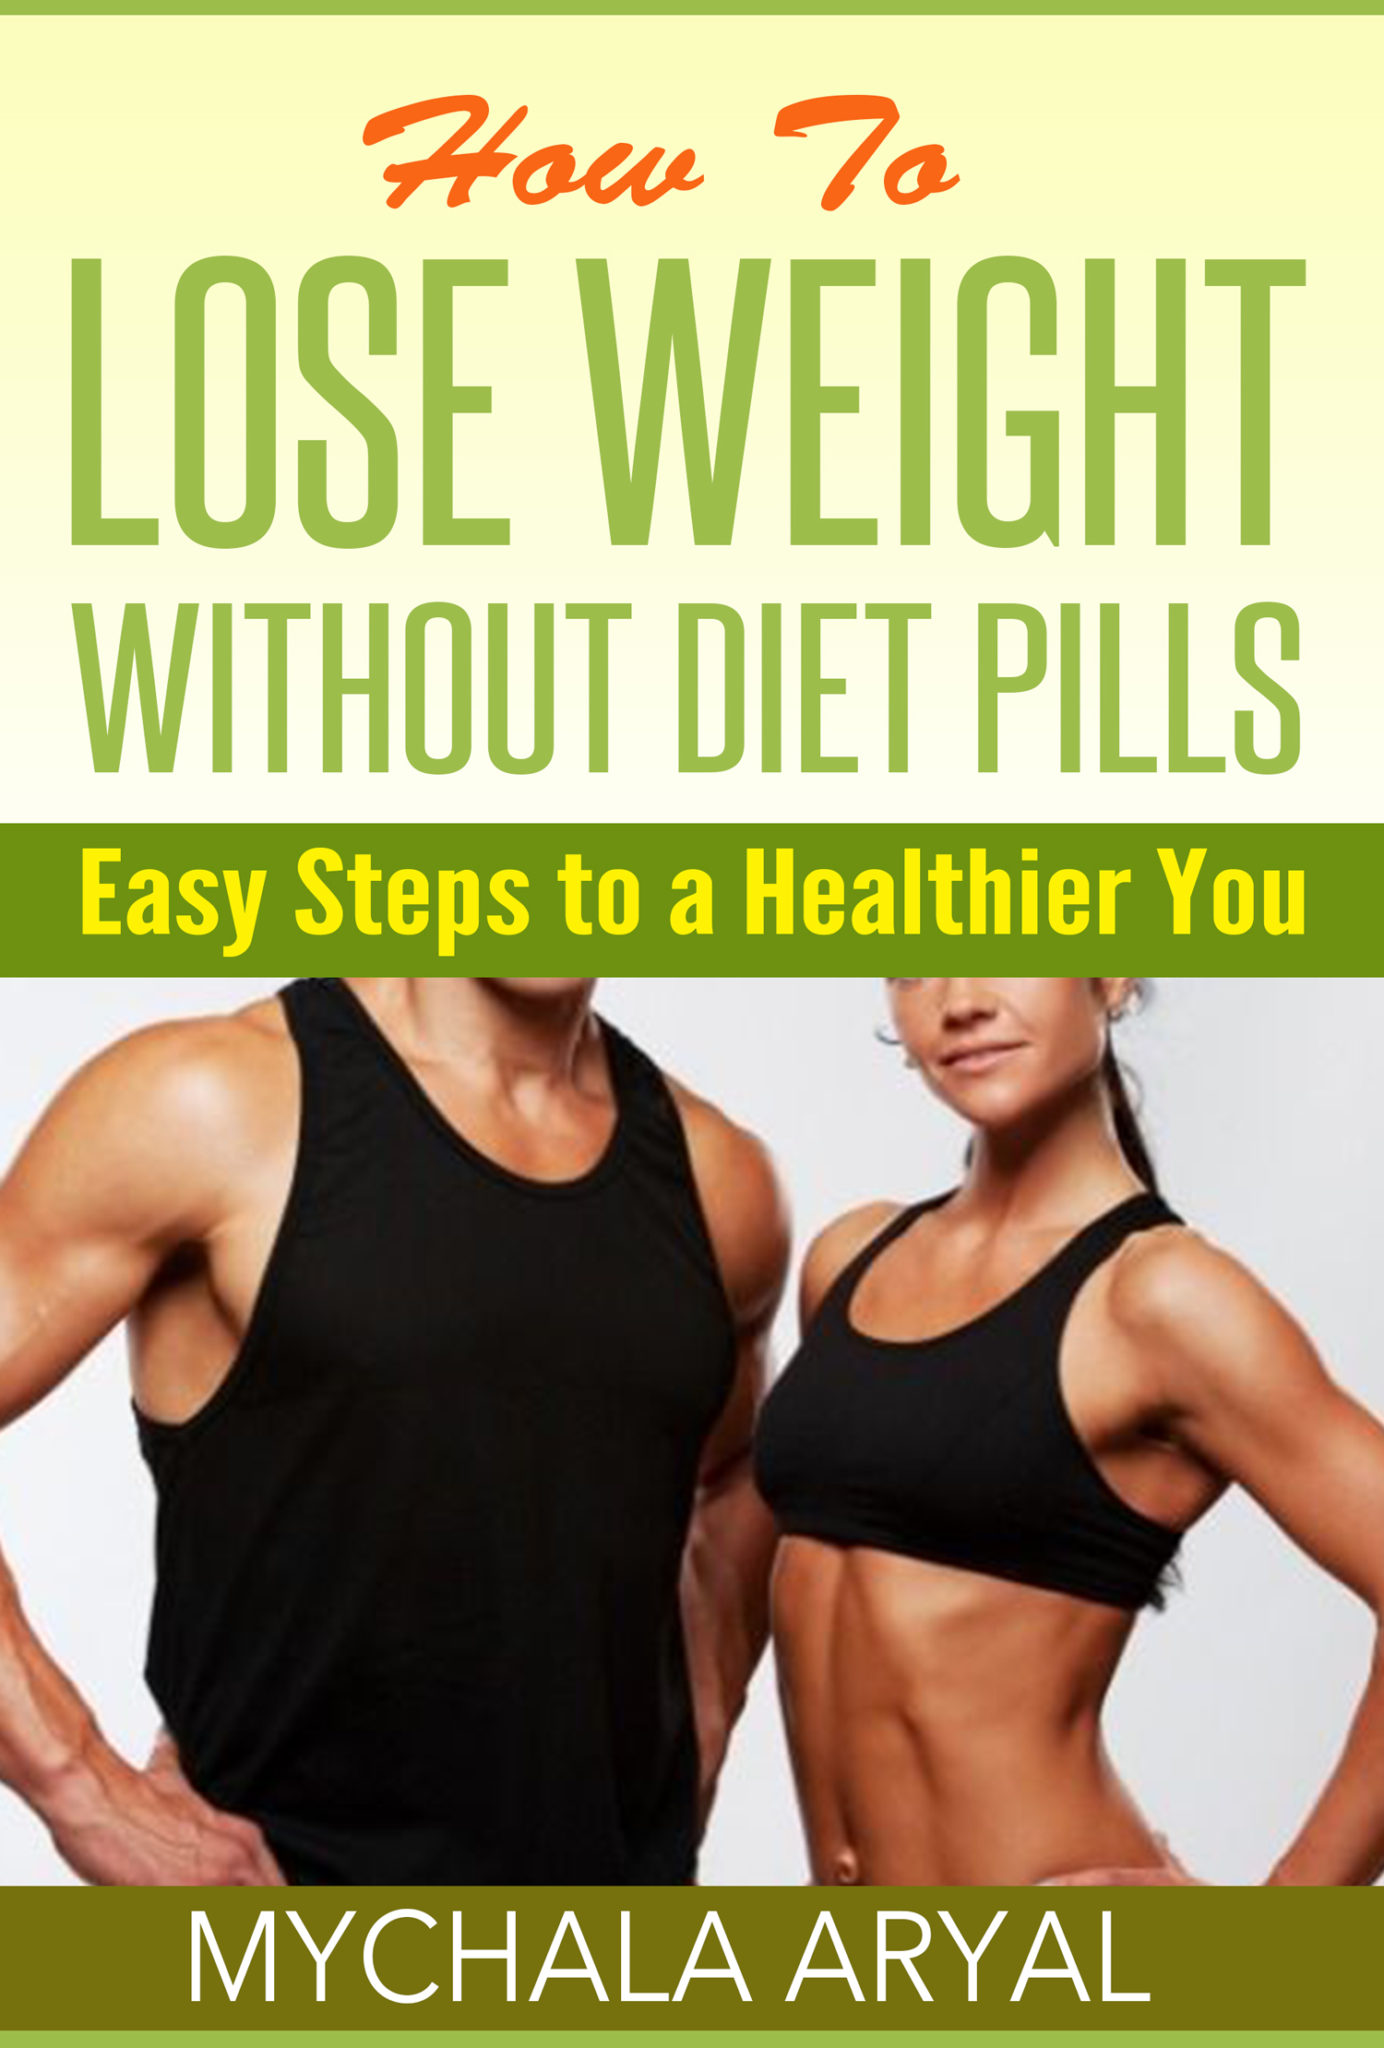 FREE: How To Lose Weight without Diet Pills by Mychala Aryal